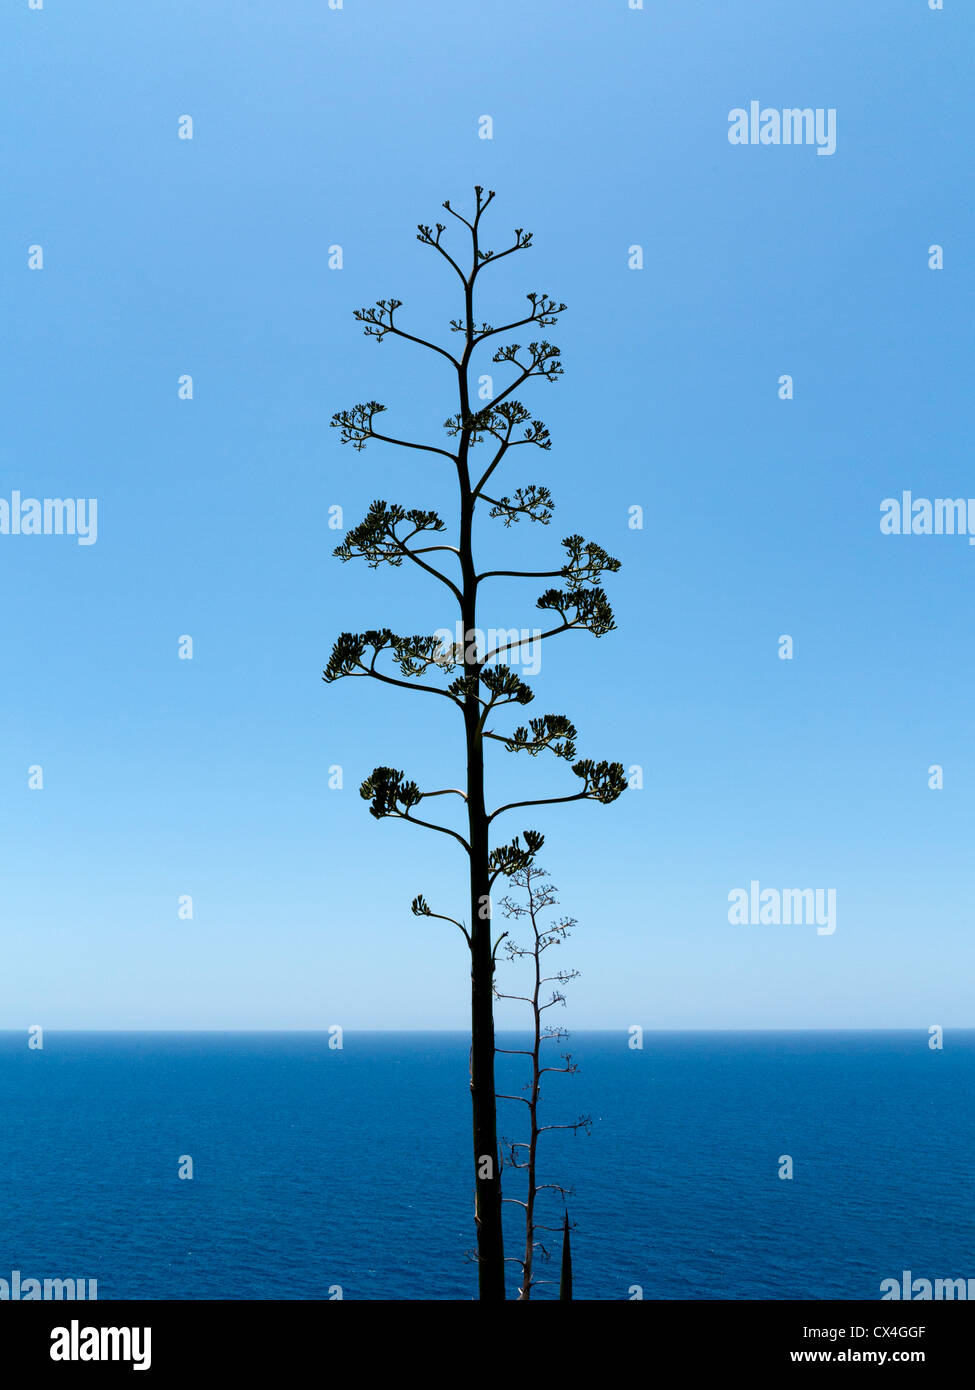 Agave tree almost in silhouette against a clear blue sky and ocean horizon Stock Photo